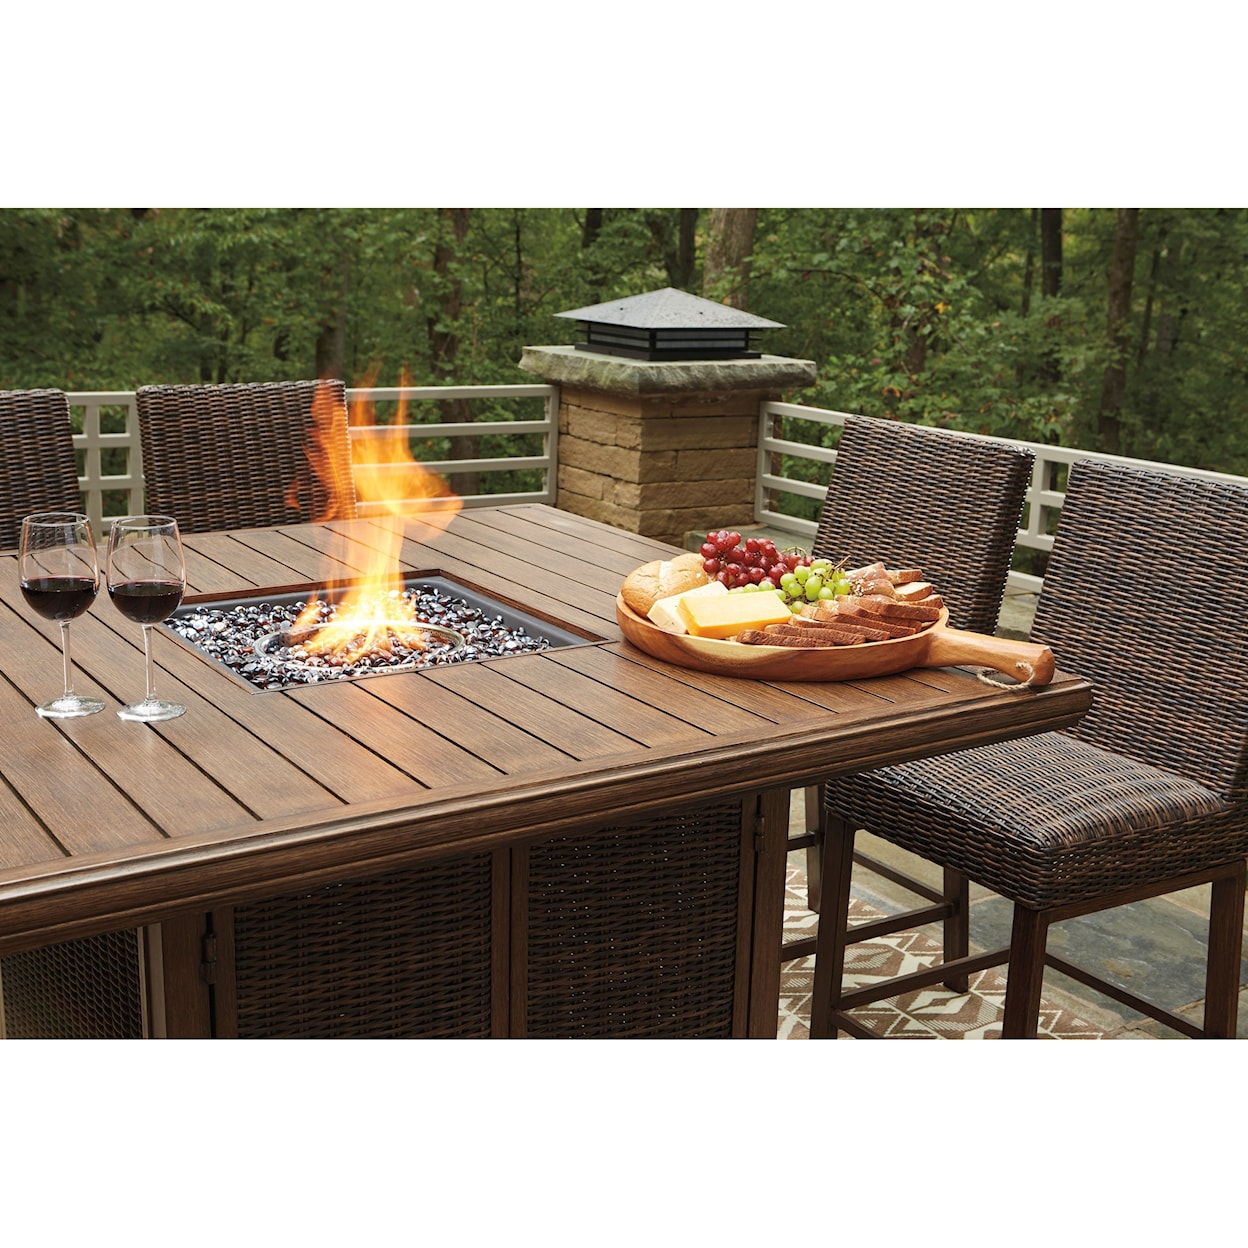 Ashley Furniture Signature Design Paradise Trail Square Bar Table with Fire Pit